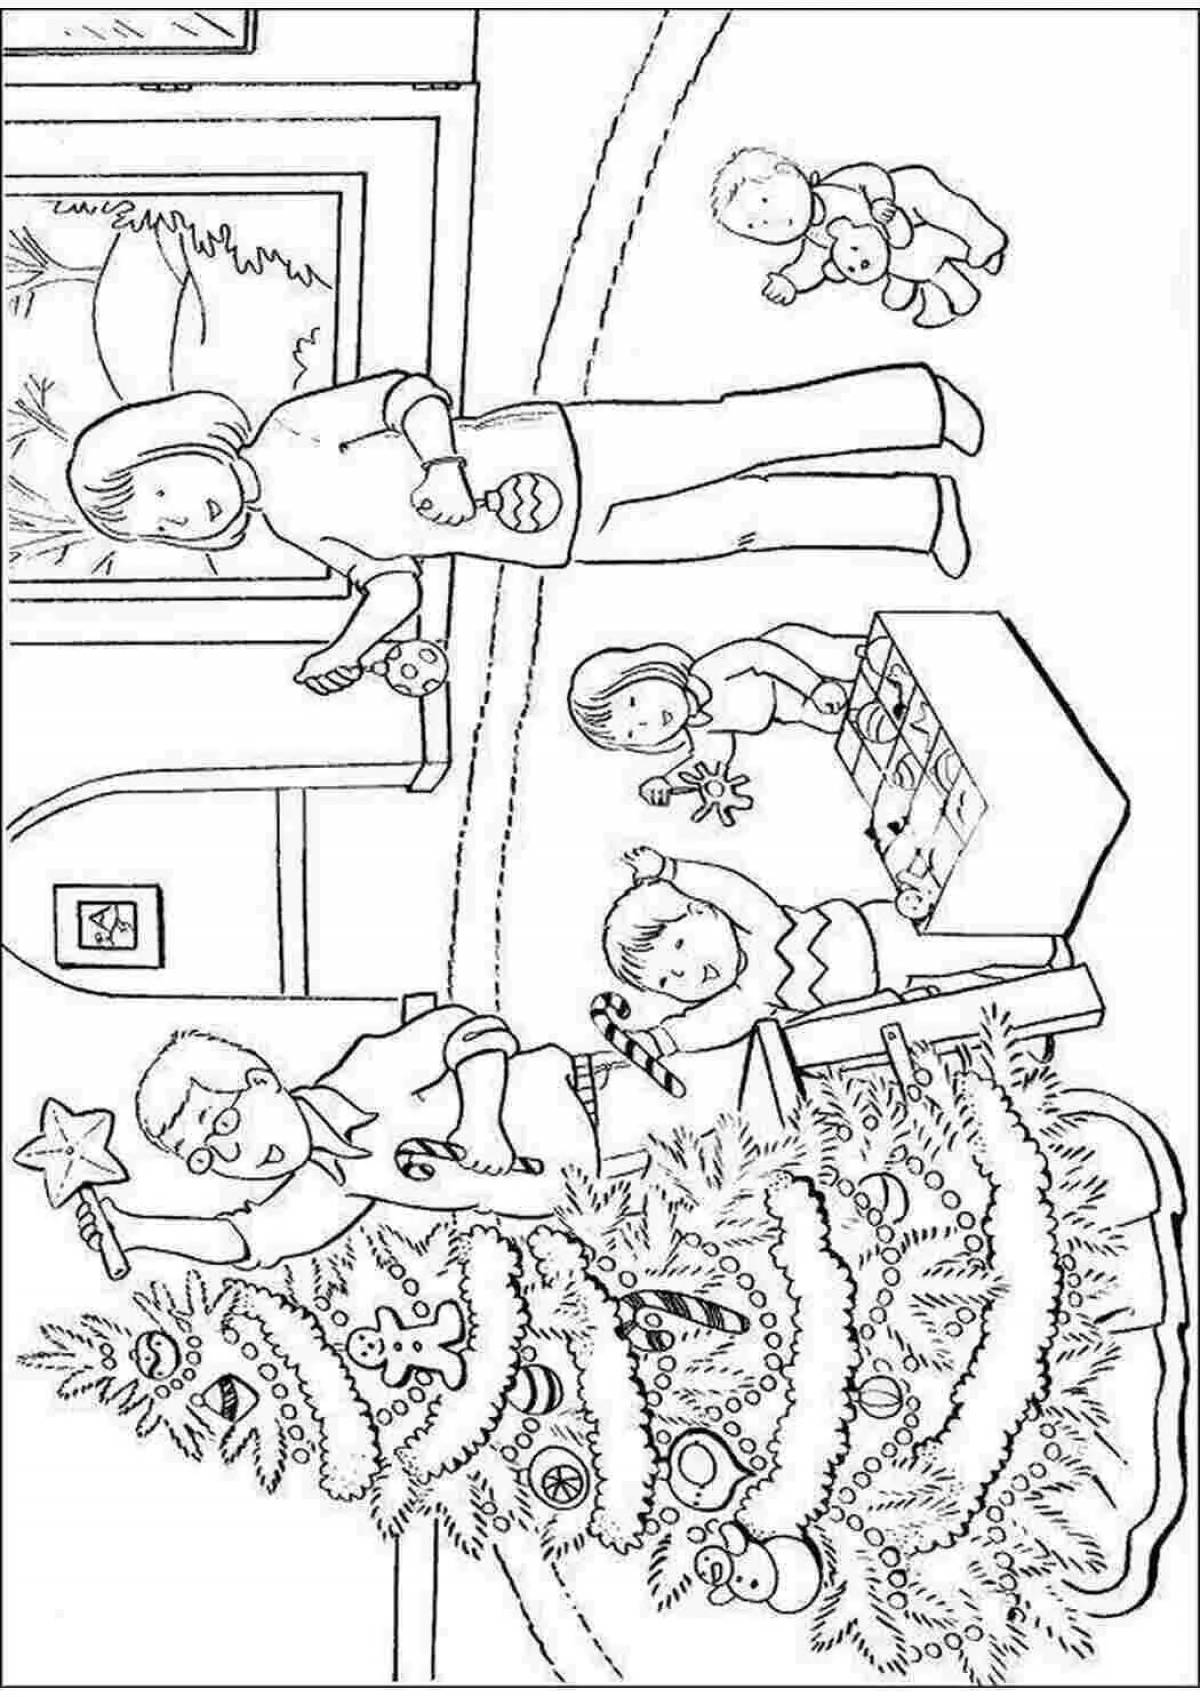 Generous Christmas family coloring book